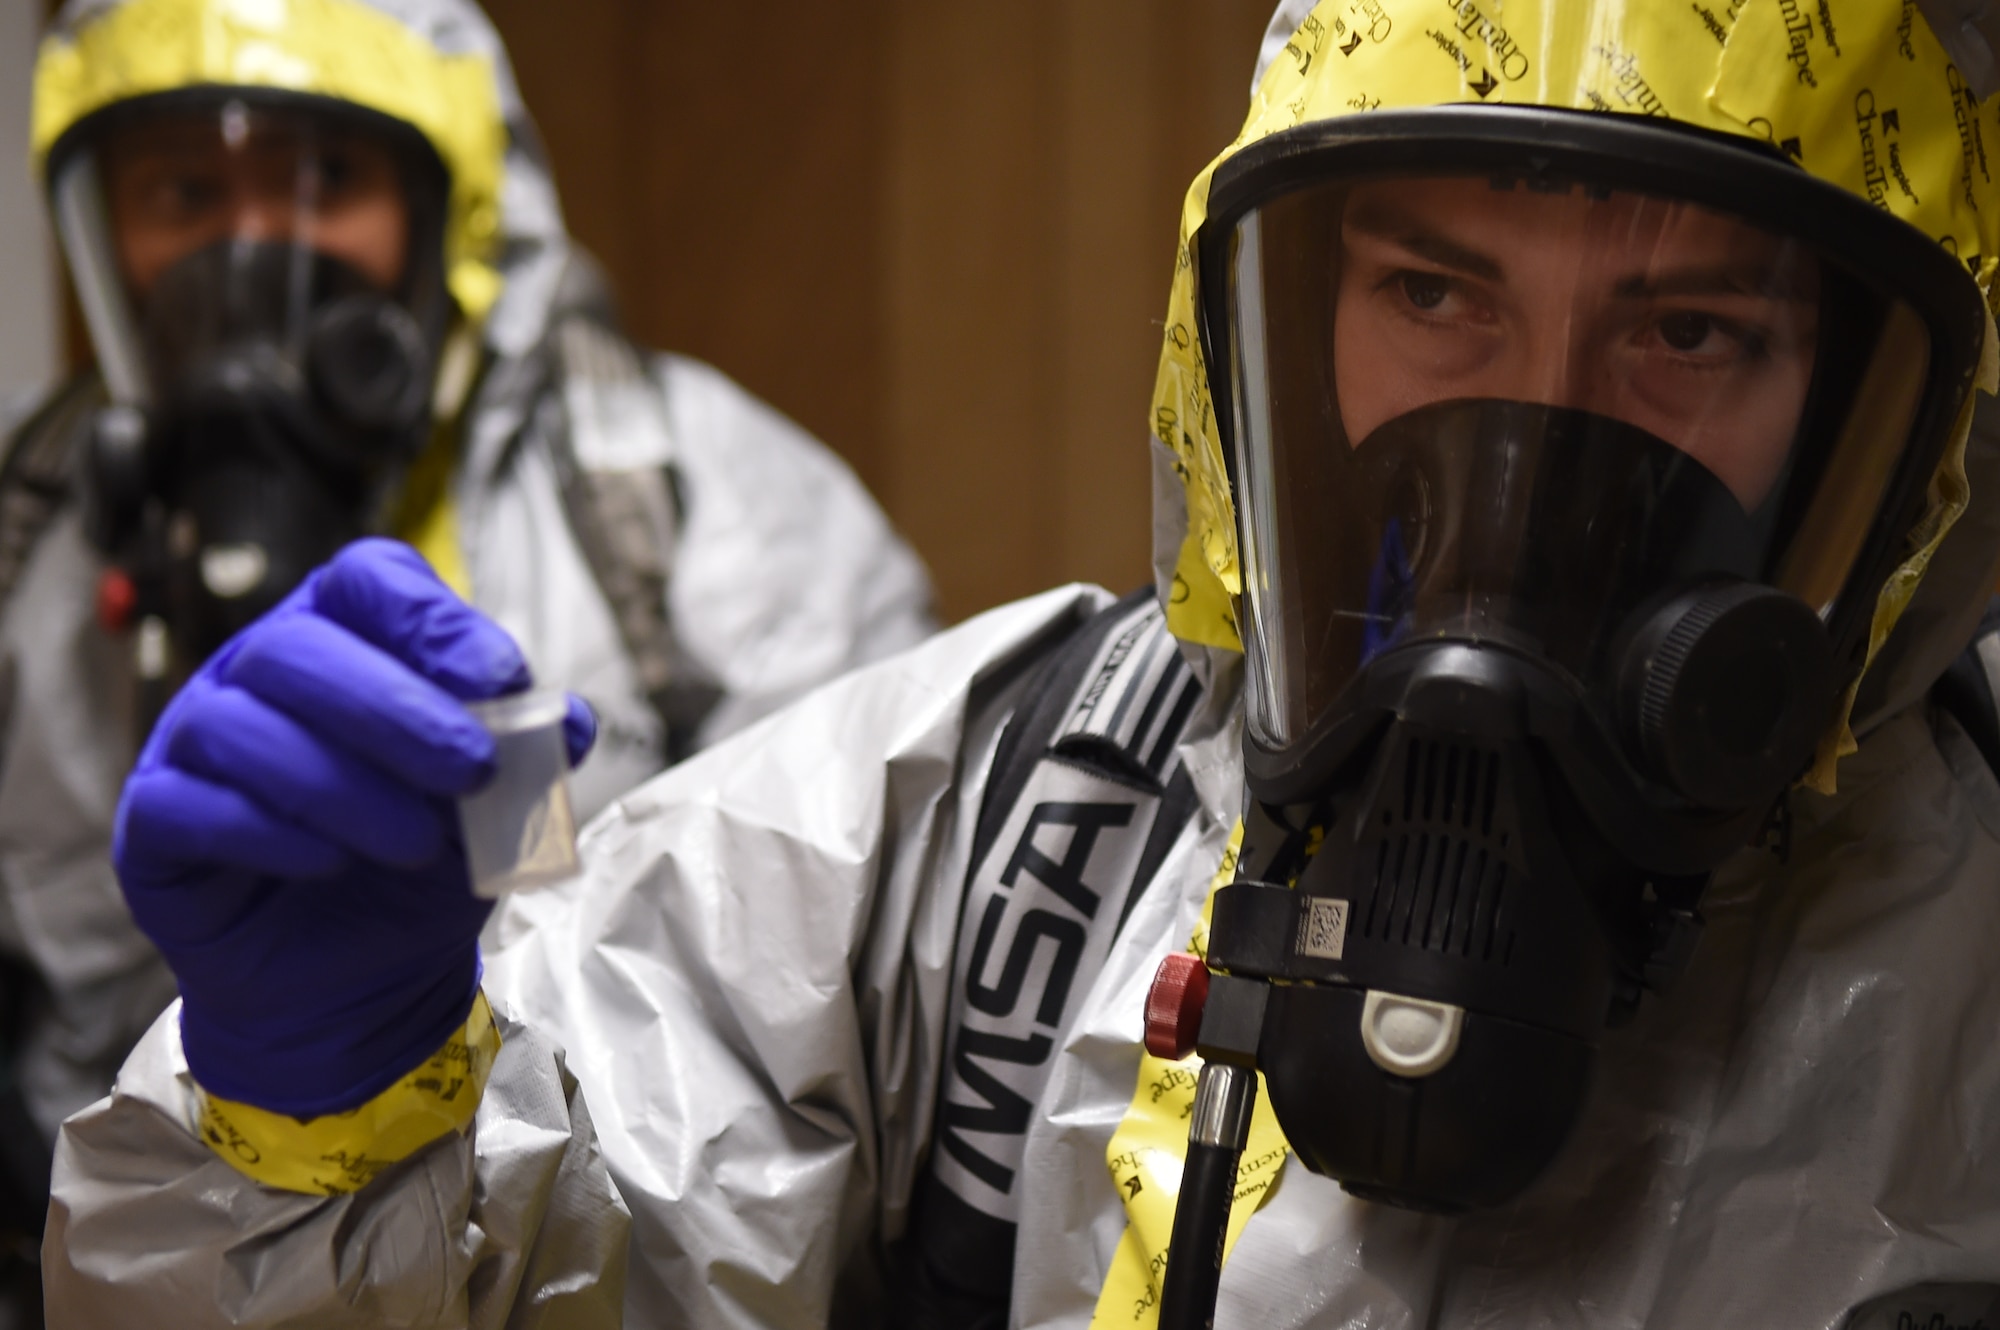 Airman Marlene Zeledon (right) samples a chemical agent during a training exercise with Staff Sgt. Yaoska Quintana March 17, 2015, in the Memorial Tunnel at the Center for National Response in Gallagher, W.Va. This training is part of the annual Black Flag exercise for first responders. Zeledon is an emergency management specialist with the 11th Civil Engineer Squadron and Quintana is the NCO in charge of flight readiness for the 779th Aerospace Medical Squadron, and both are assigned to Joint Base Andrews, Md. (U.S. Air Force photo/Senior Airman Joshua R. M. Dewberry)